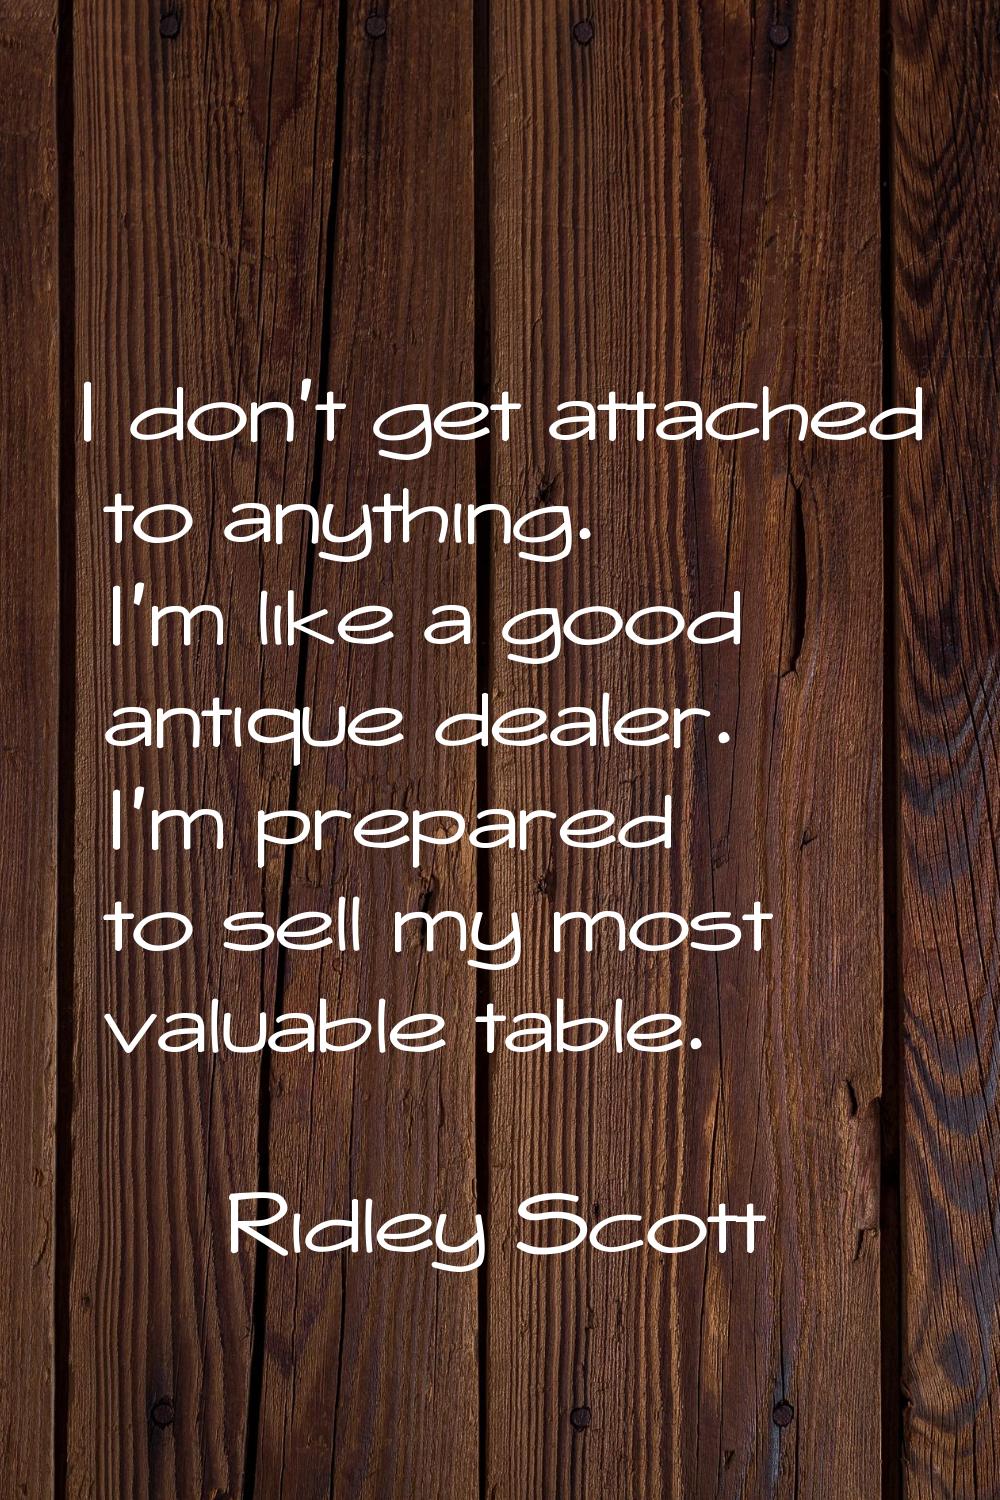 I don't get attached to anything. I'm like a good antique dealer. I'm prepared to sell my most valu